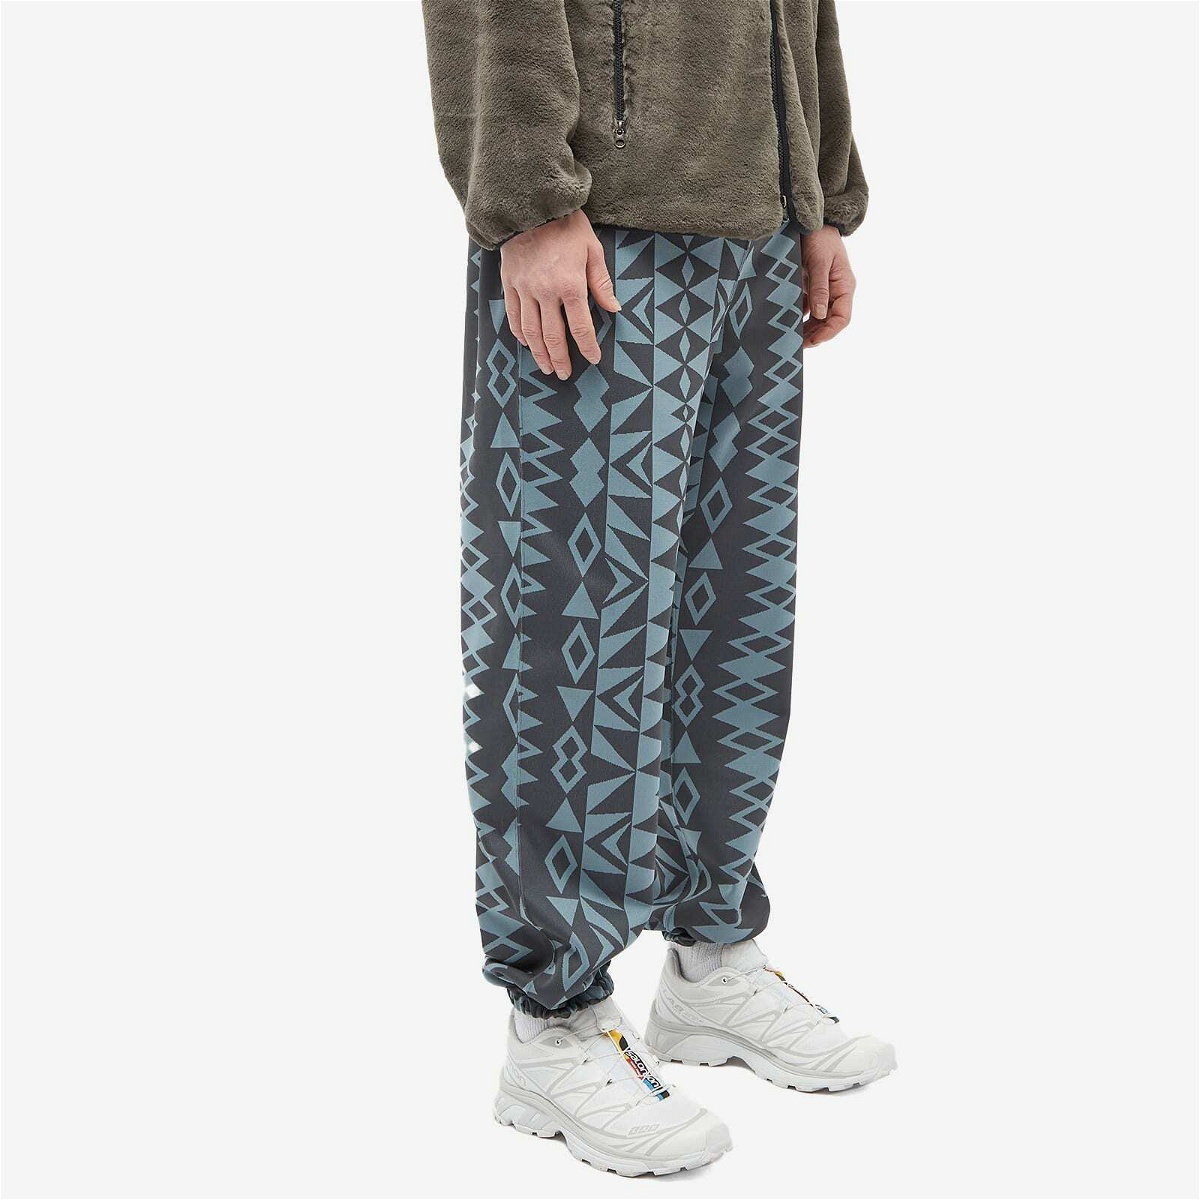 South2 West8 Men's Skull & Target String Sweatpants in Charcoal South2 West8